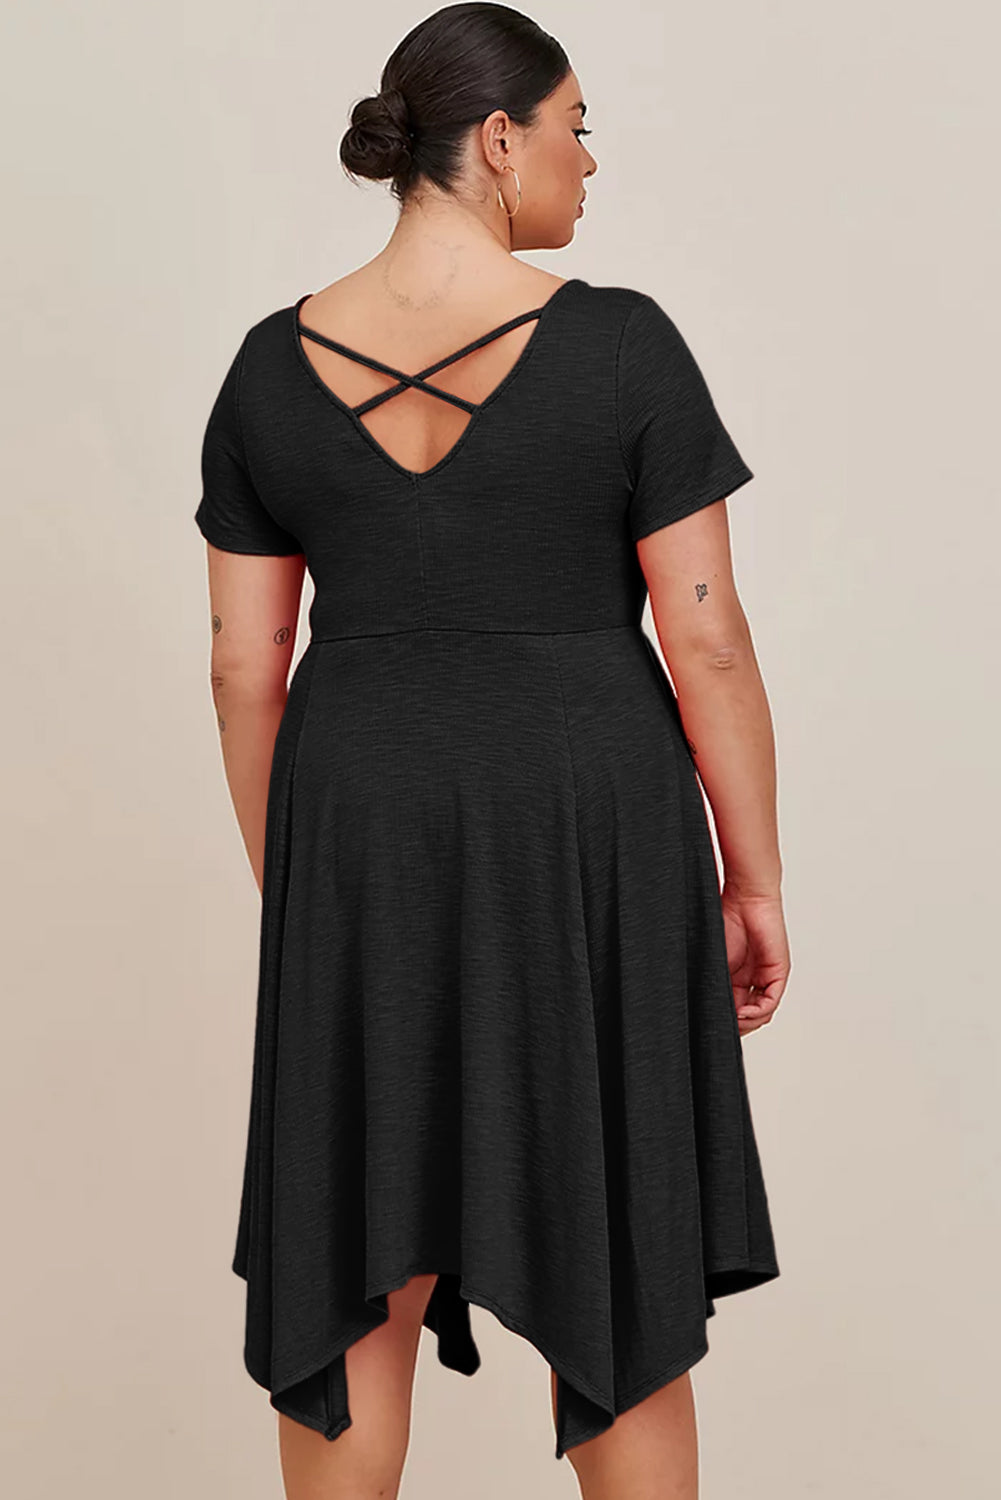 Black Plus Size Ruched Sweetheart Fit and Flare Midi Dress Plus Size Dresses JT's Designer Fashion